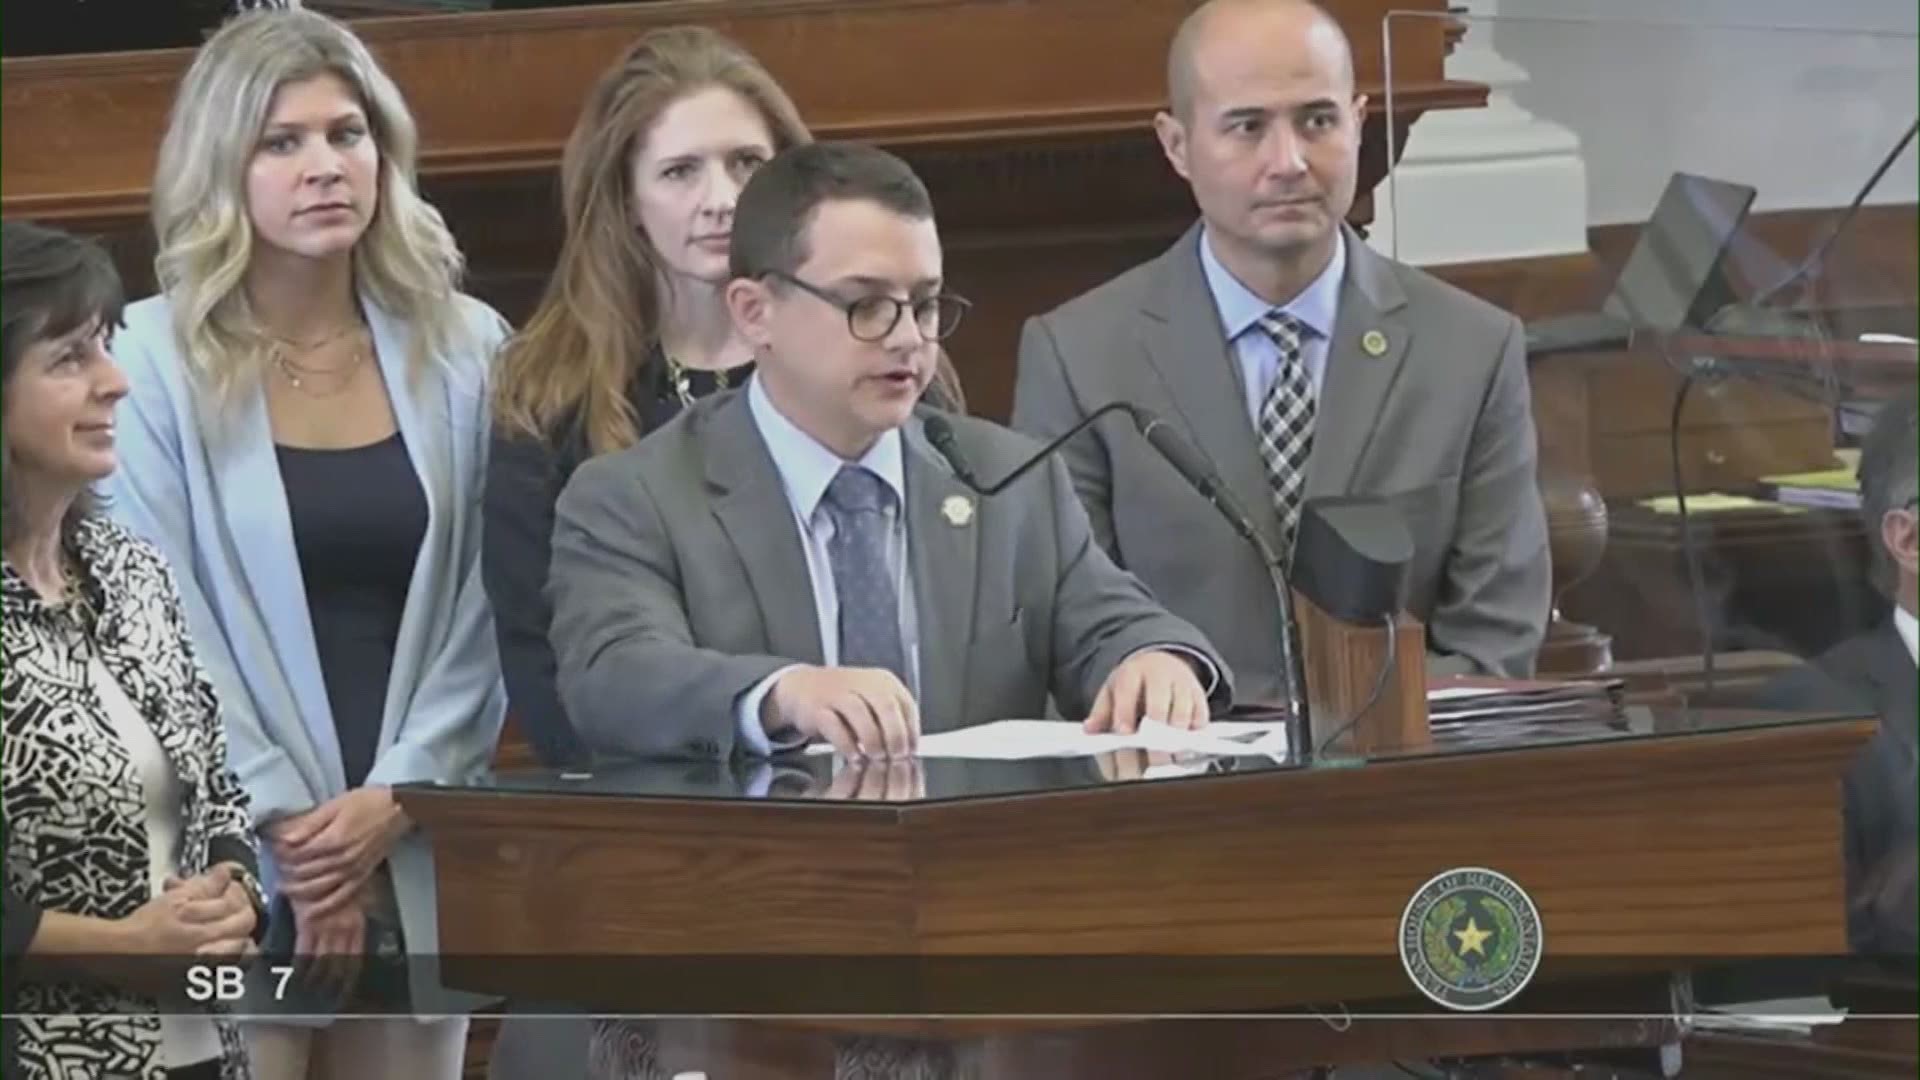 As opposition to Texas Republicans’ proposed voting restrictions continues to intensify, the House passed SB7 in a final vote and sent it back to the Senate.